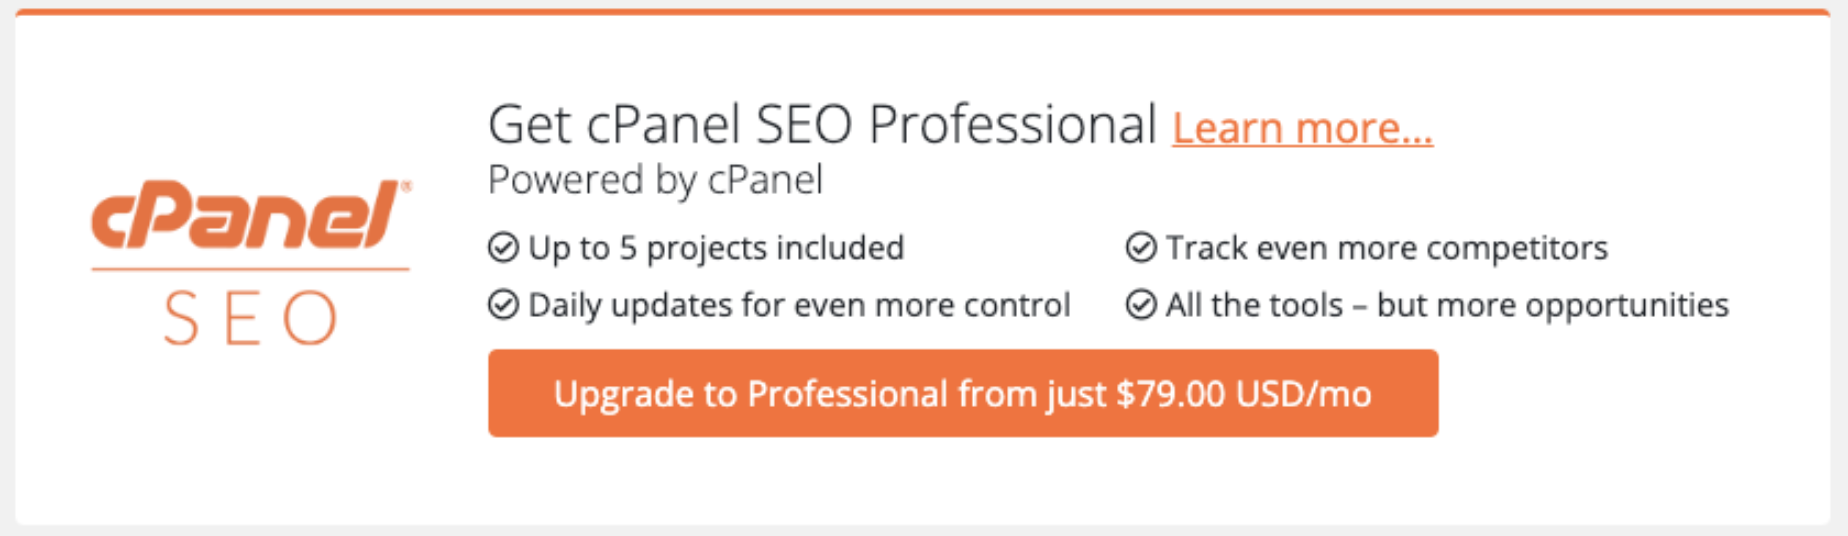 cPanel SEO promotion in the Client Area